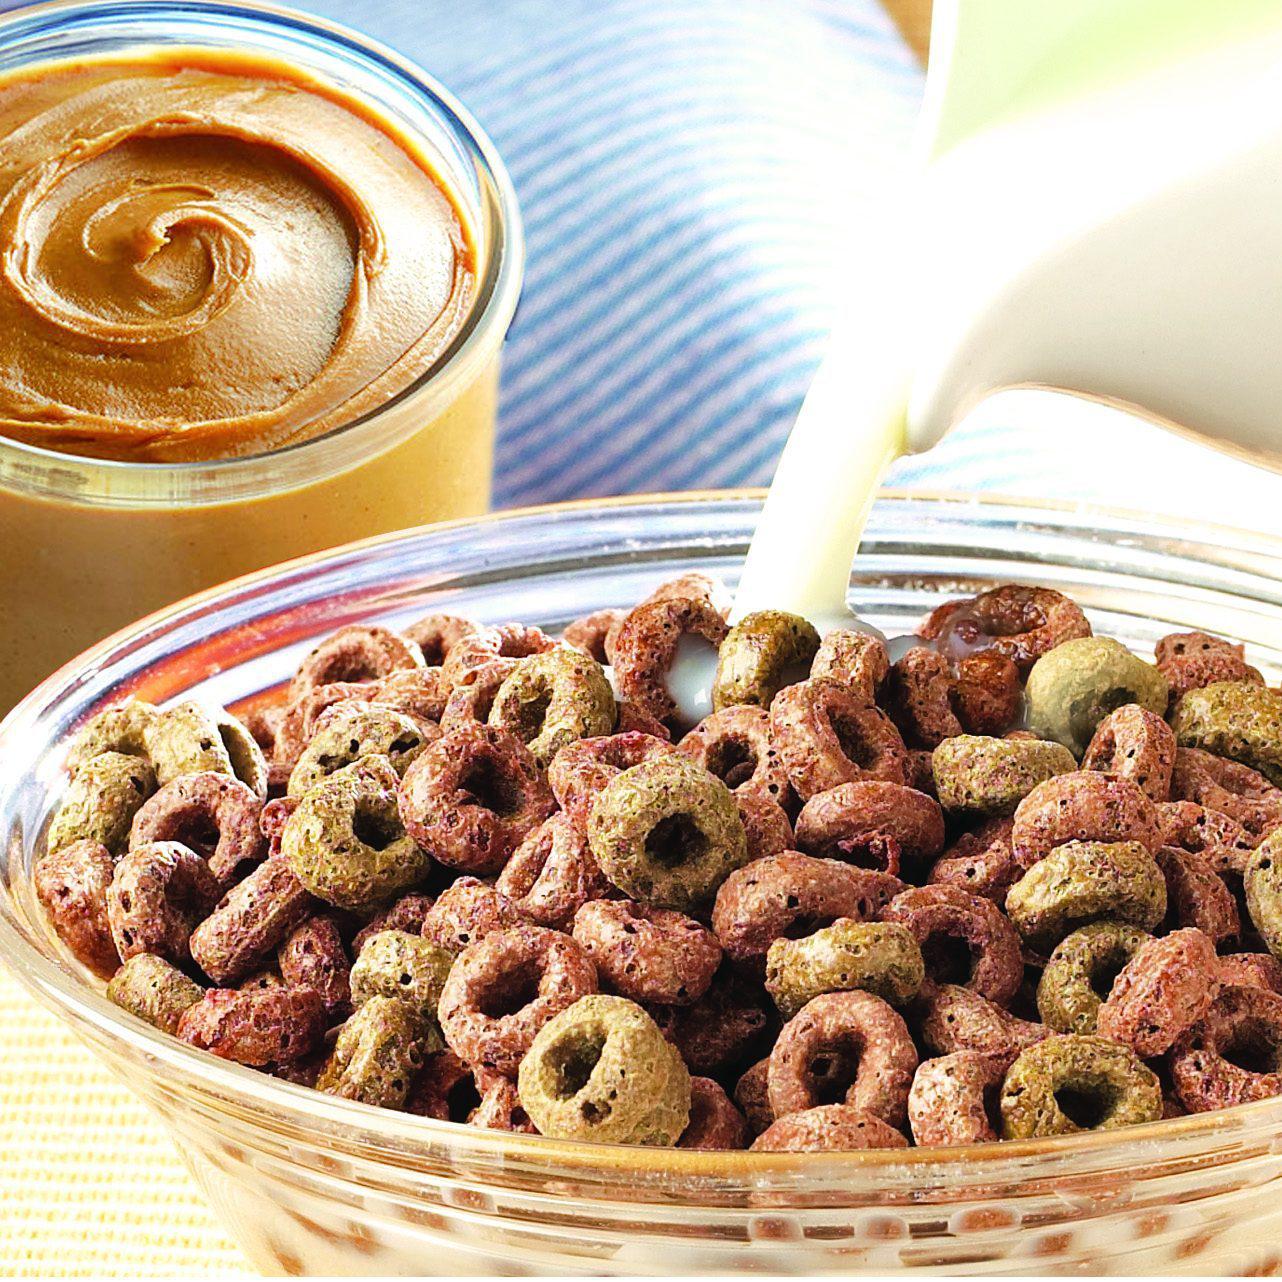 Chocolate Peanut Butter Cereal (7/Box) - Nutriwise - Doctors Weight Loss